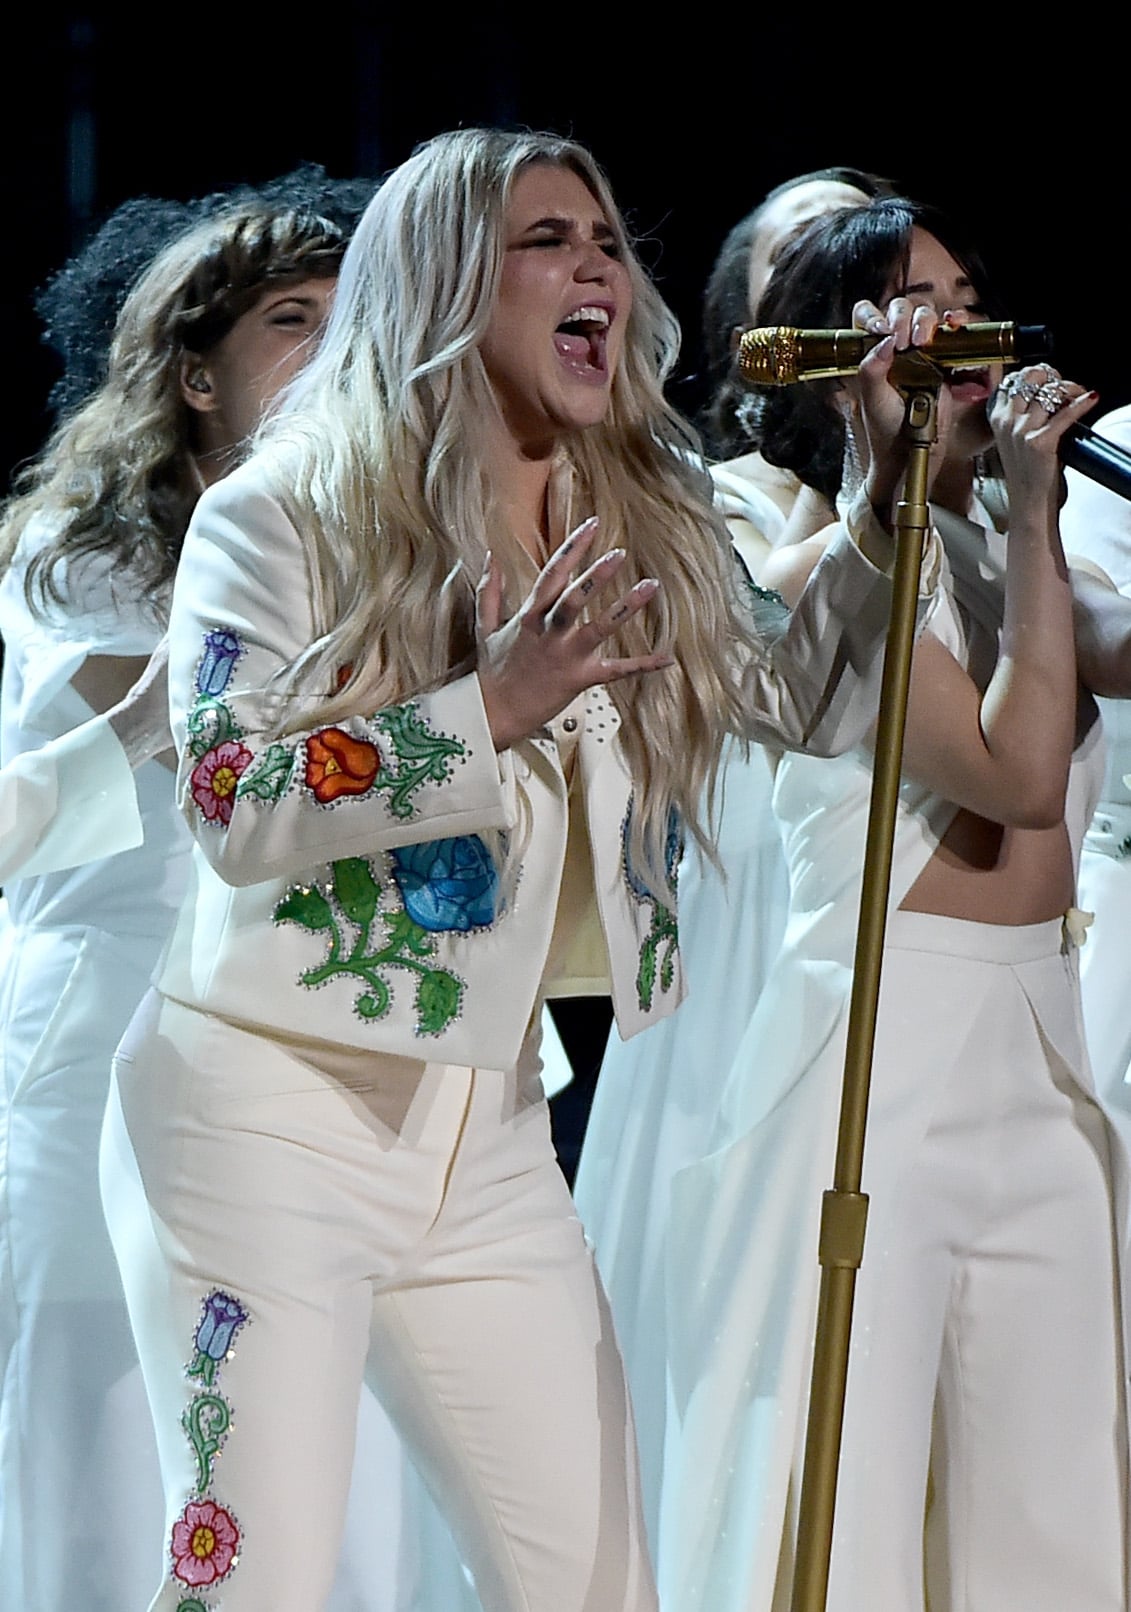 Kesha had everyone on their feet at the show in 2018.